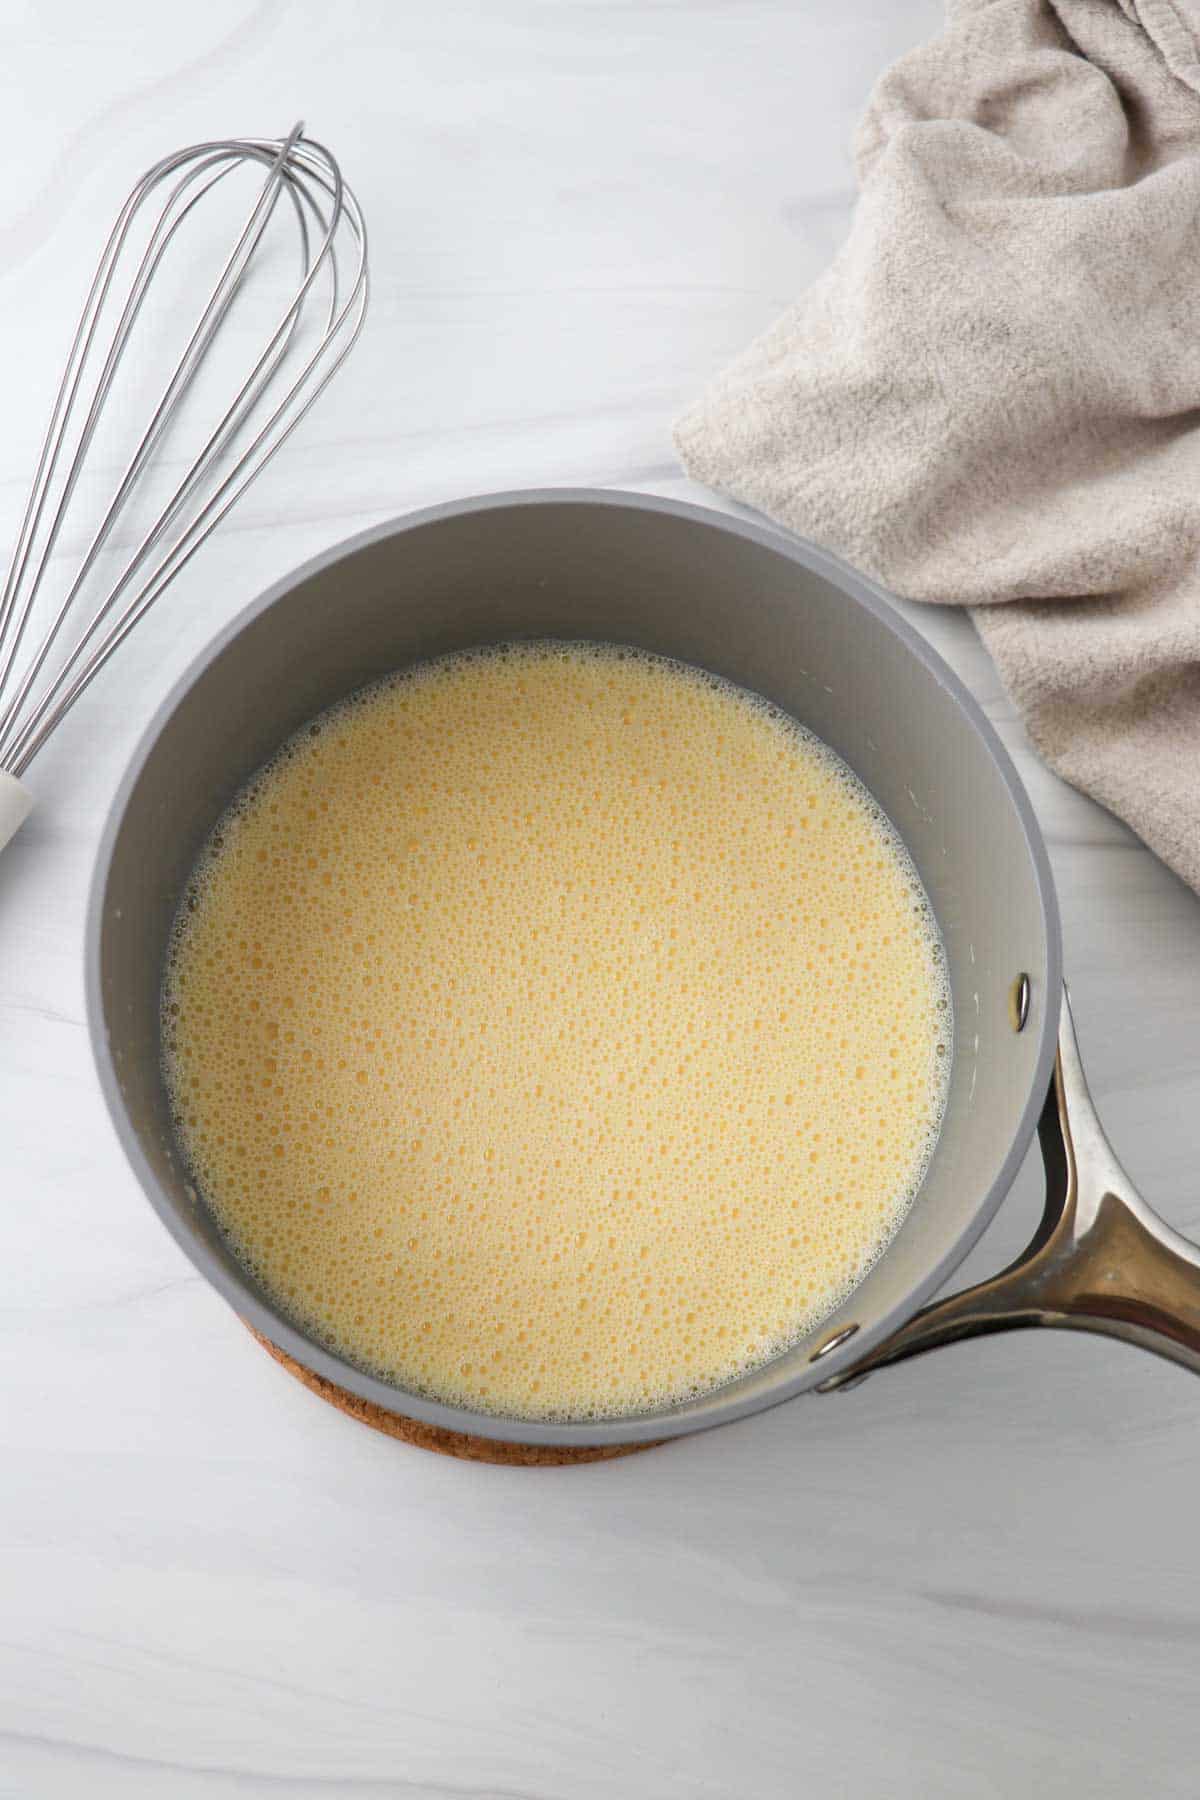 Vanilla sauce in a saucepan next to a whisk and a towel.